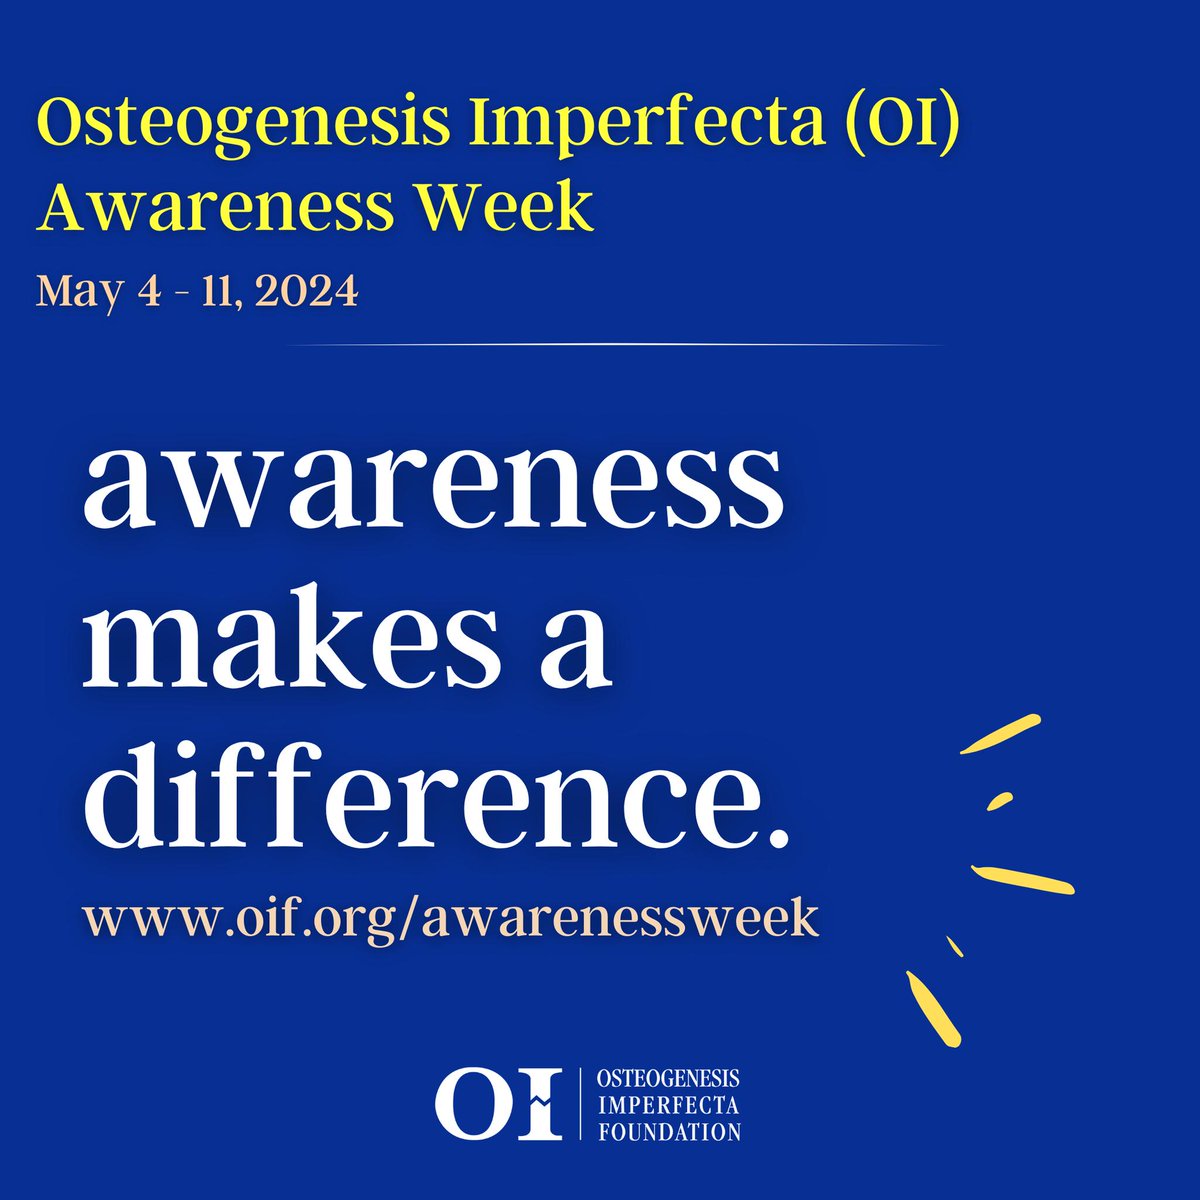 Do you know what osteogenesis imperfecta (OI) is? OI is a rare and complex genetic disorder of the collagen that is often characterized by bones that break easily. Learn more about OI at oif.org. #Oiawarenessweek #UnbreakableSpirit